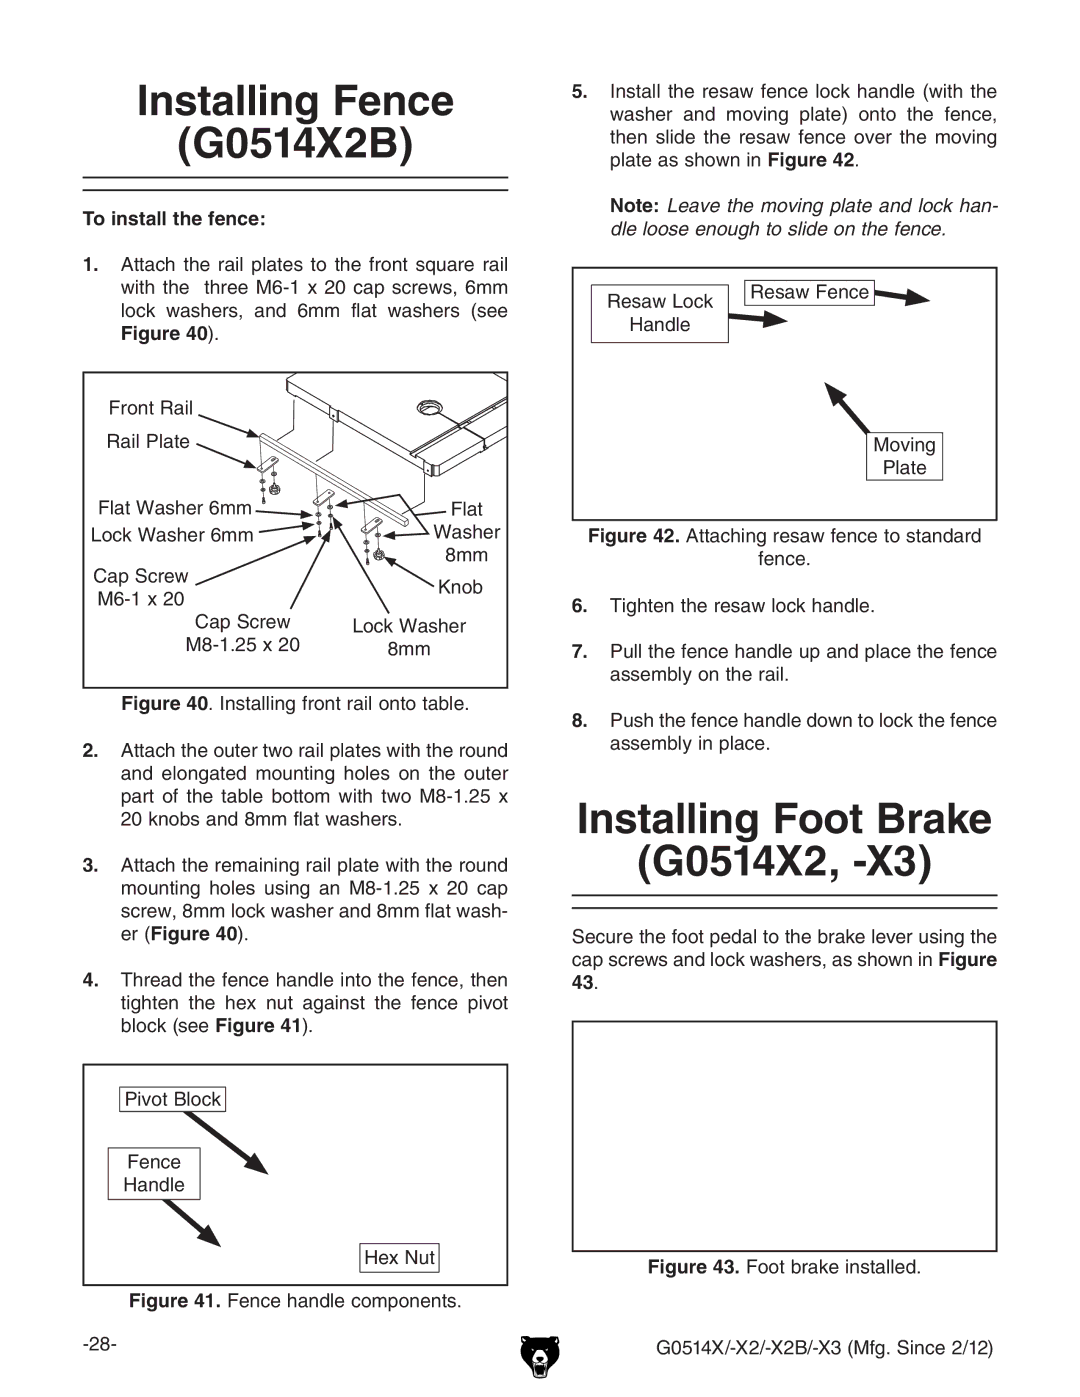 Grizzly owner manual Installing Fence G0514X2B, Installing Foot Brake G0514X2 